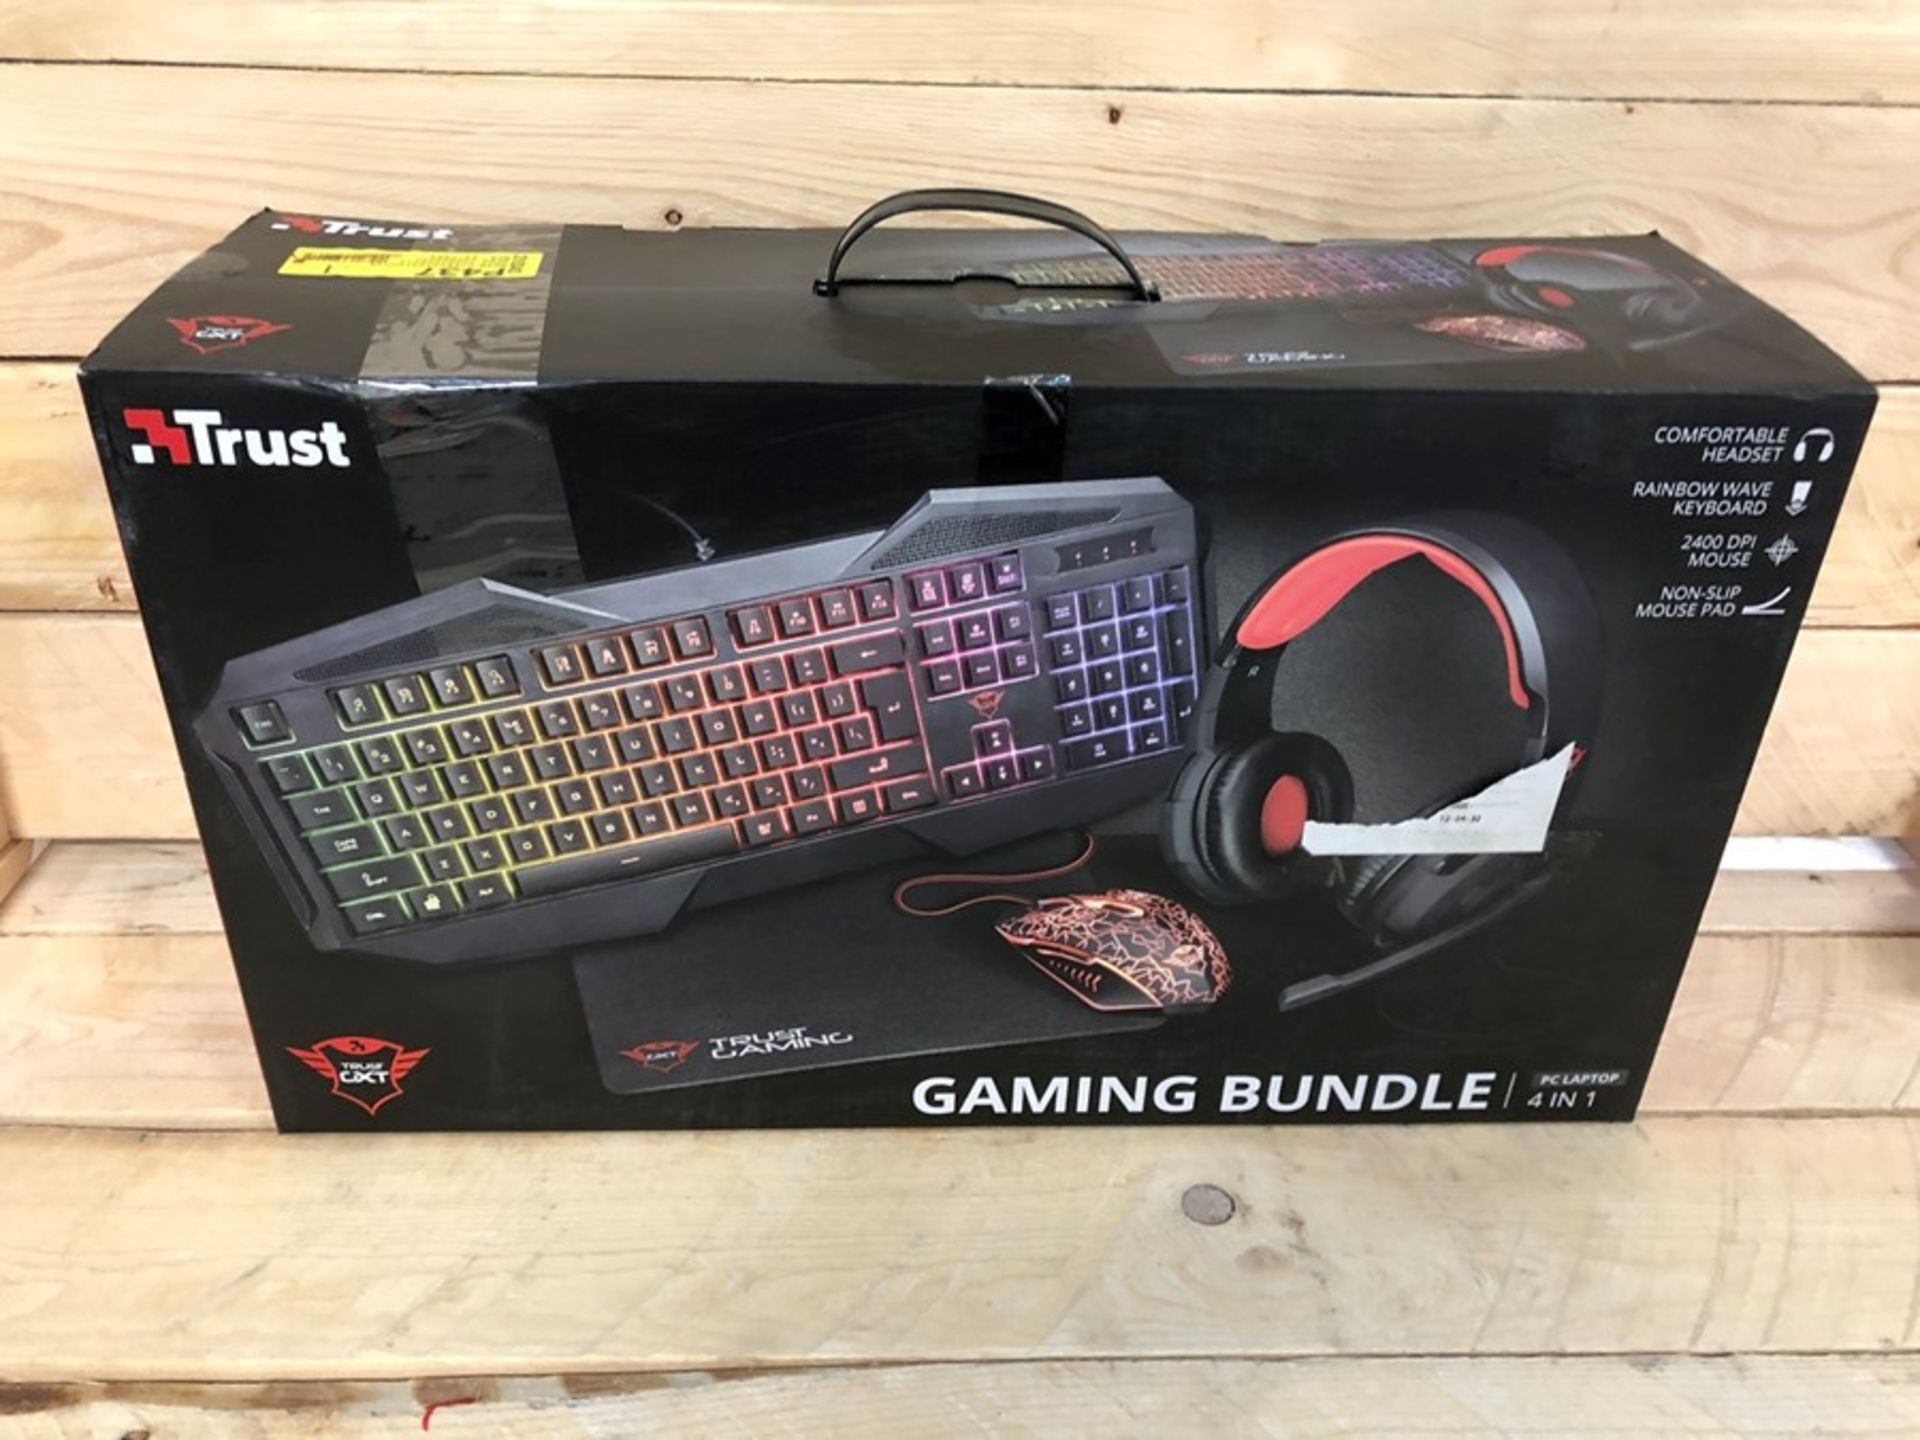 1 BOXED TRUST 4 IN 1 GAMING BUNDLE TO INCLUDE KEYBOARD, GAMING MOUSE, HEADSET AND MOUSEMAT / RRP £